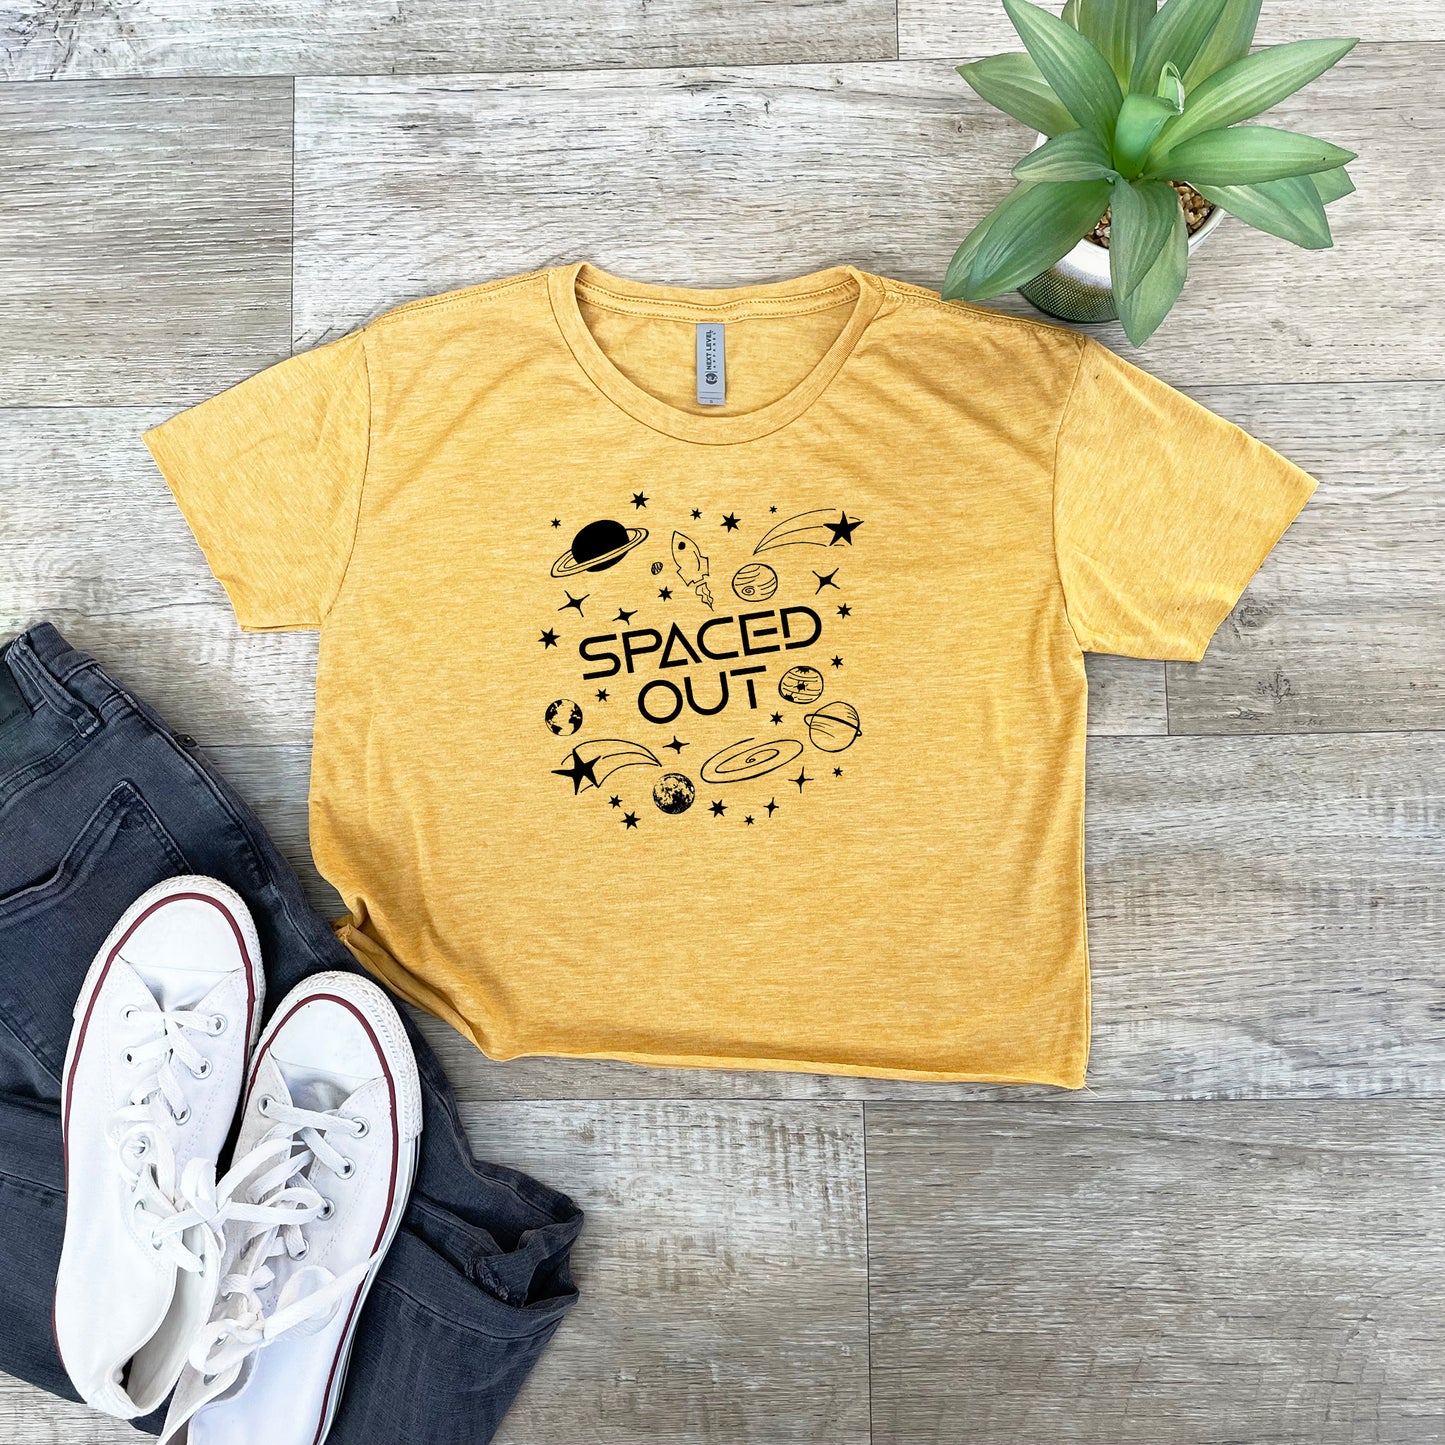 Spaced Out - Women's Crop Tee - Heather Gray or Gold